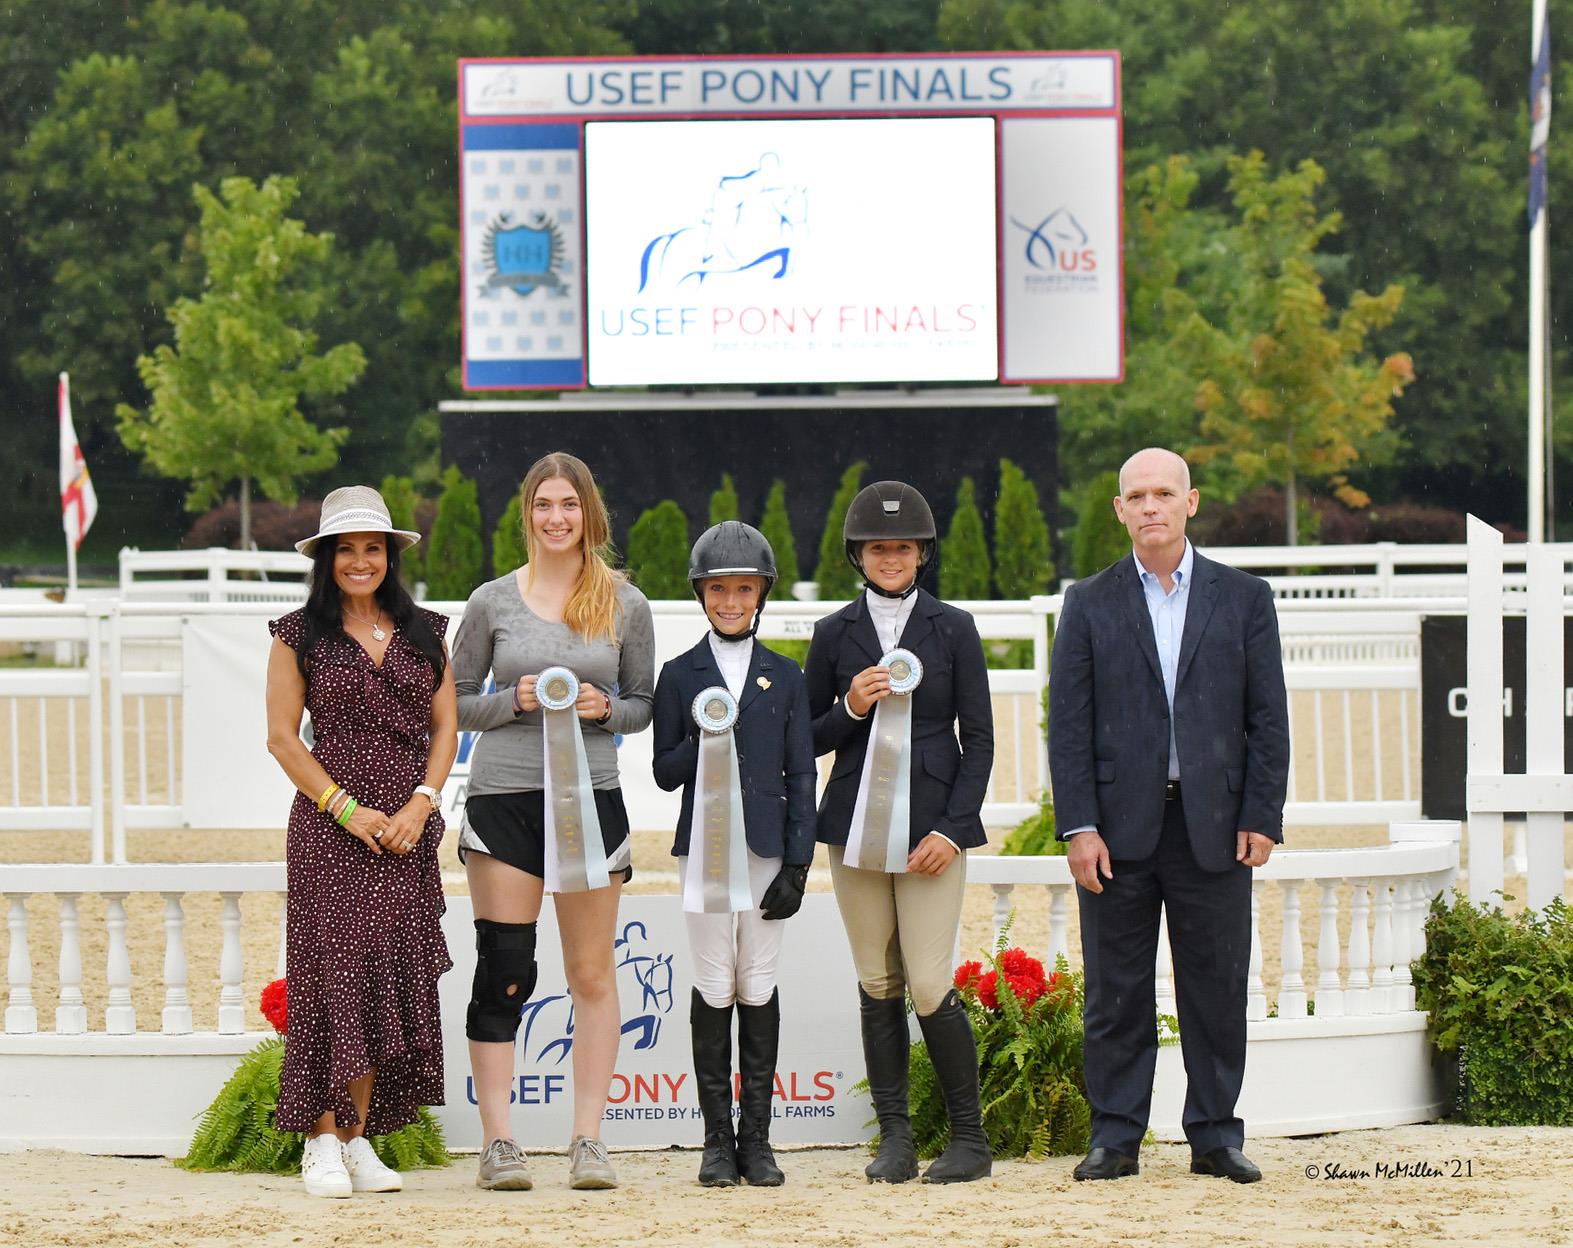 Emerson Burr Horsemanship Grant winners at USEF Pony Finals in 2021